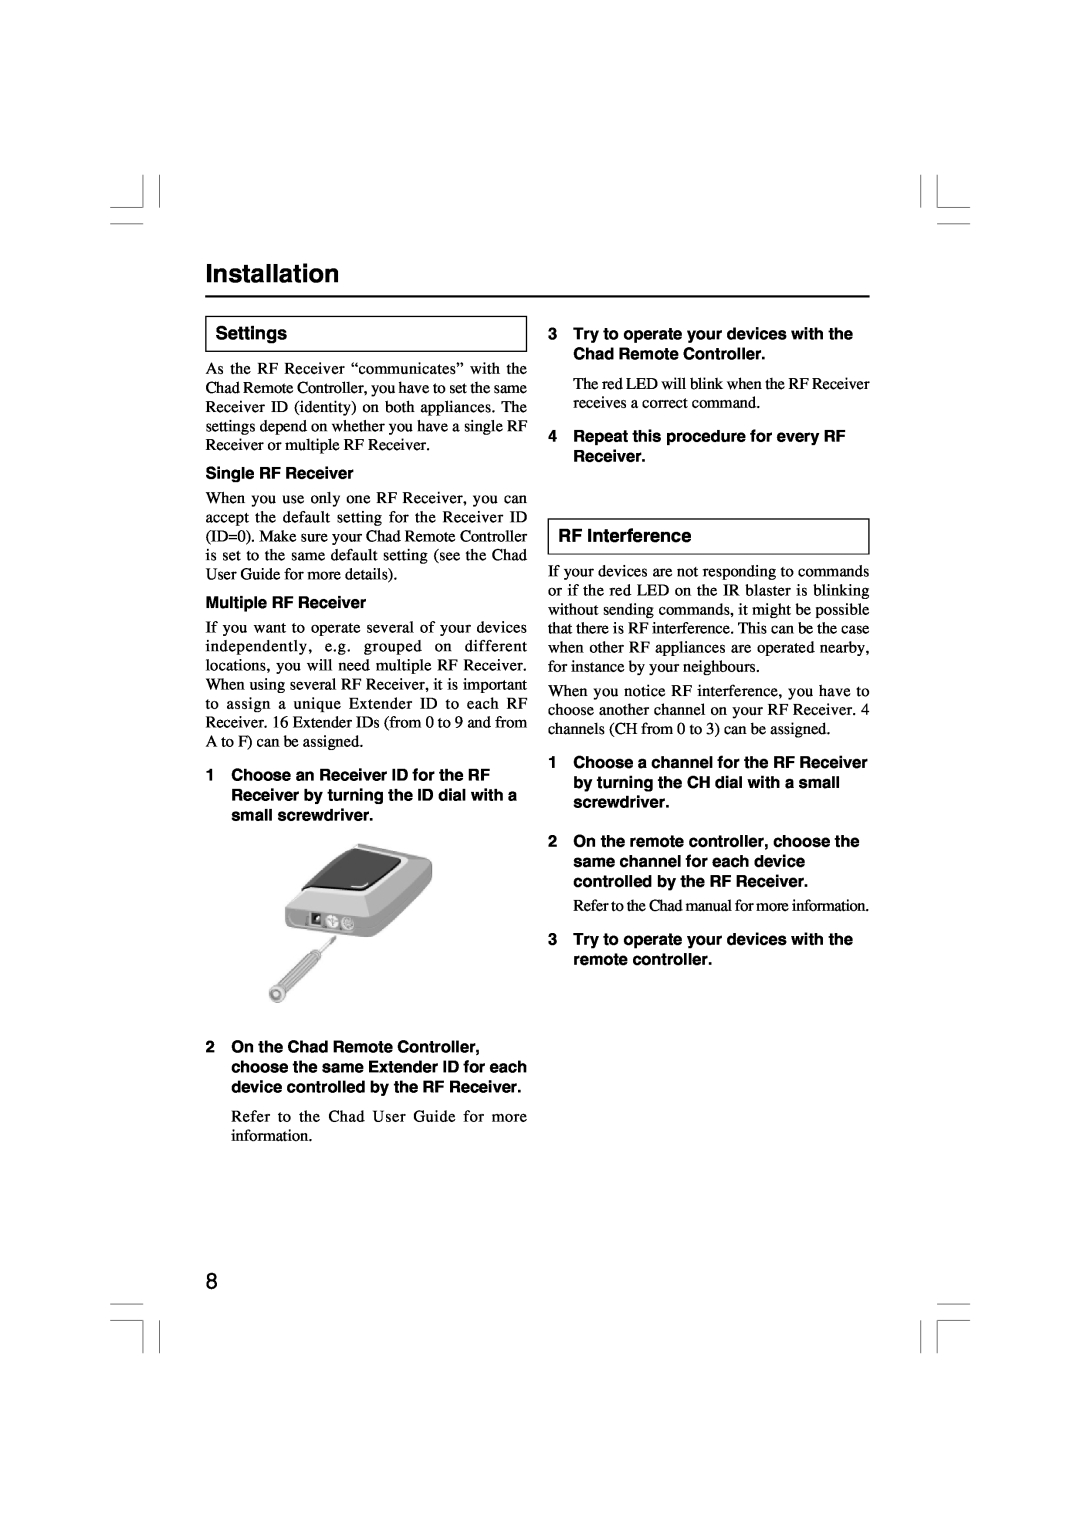 Onkyo RFR-5 instruction manual Installation, Settings, RF Interference, Single RF Receiver, Multiple RF Receiver 